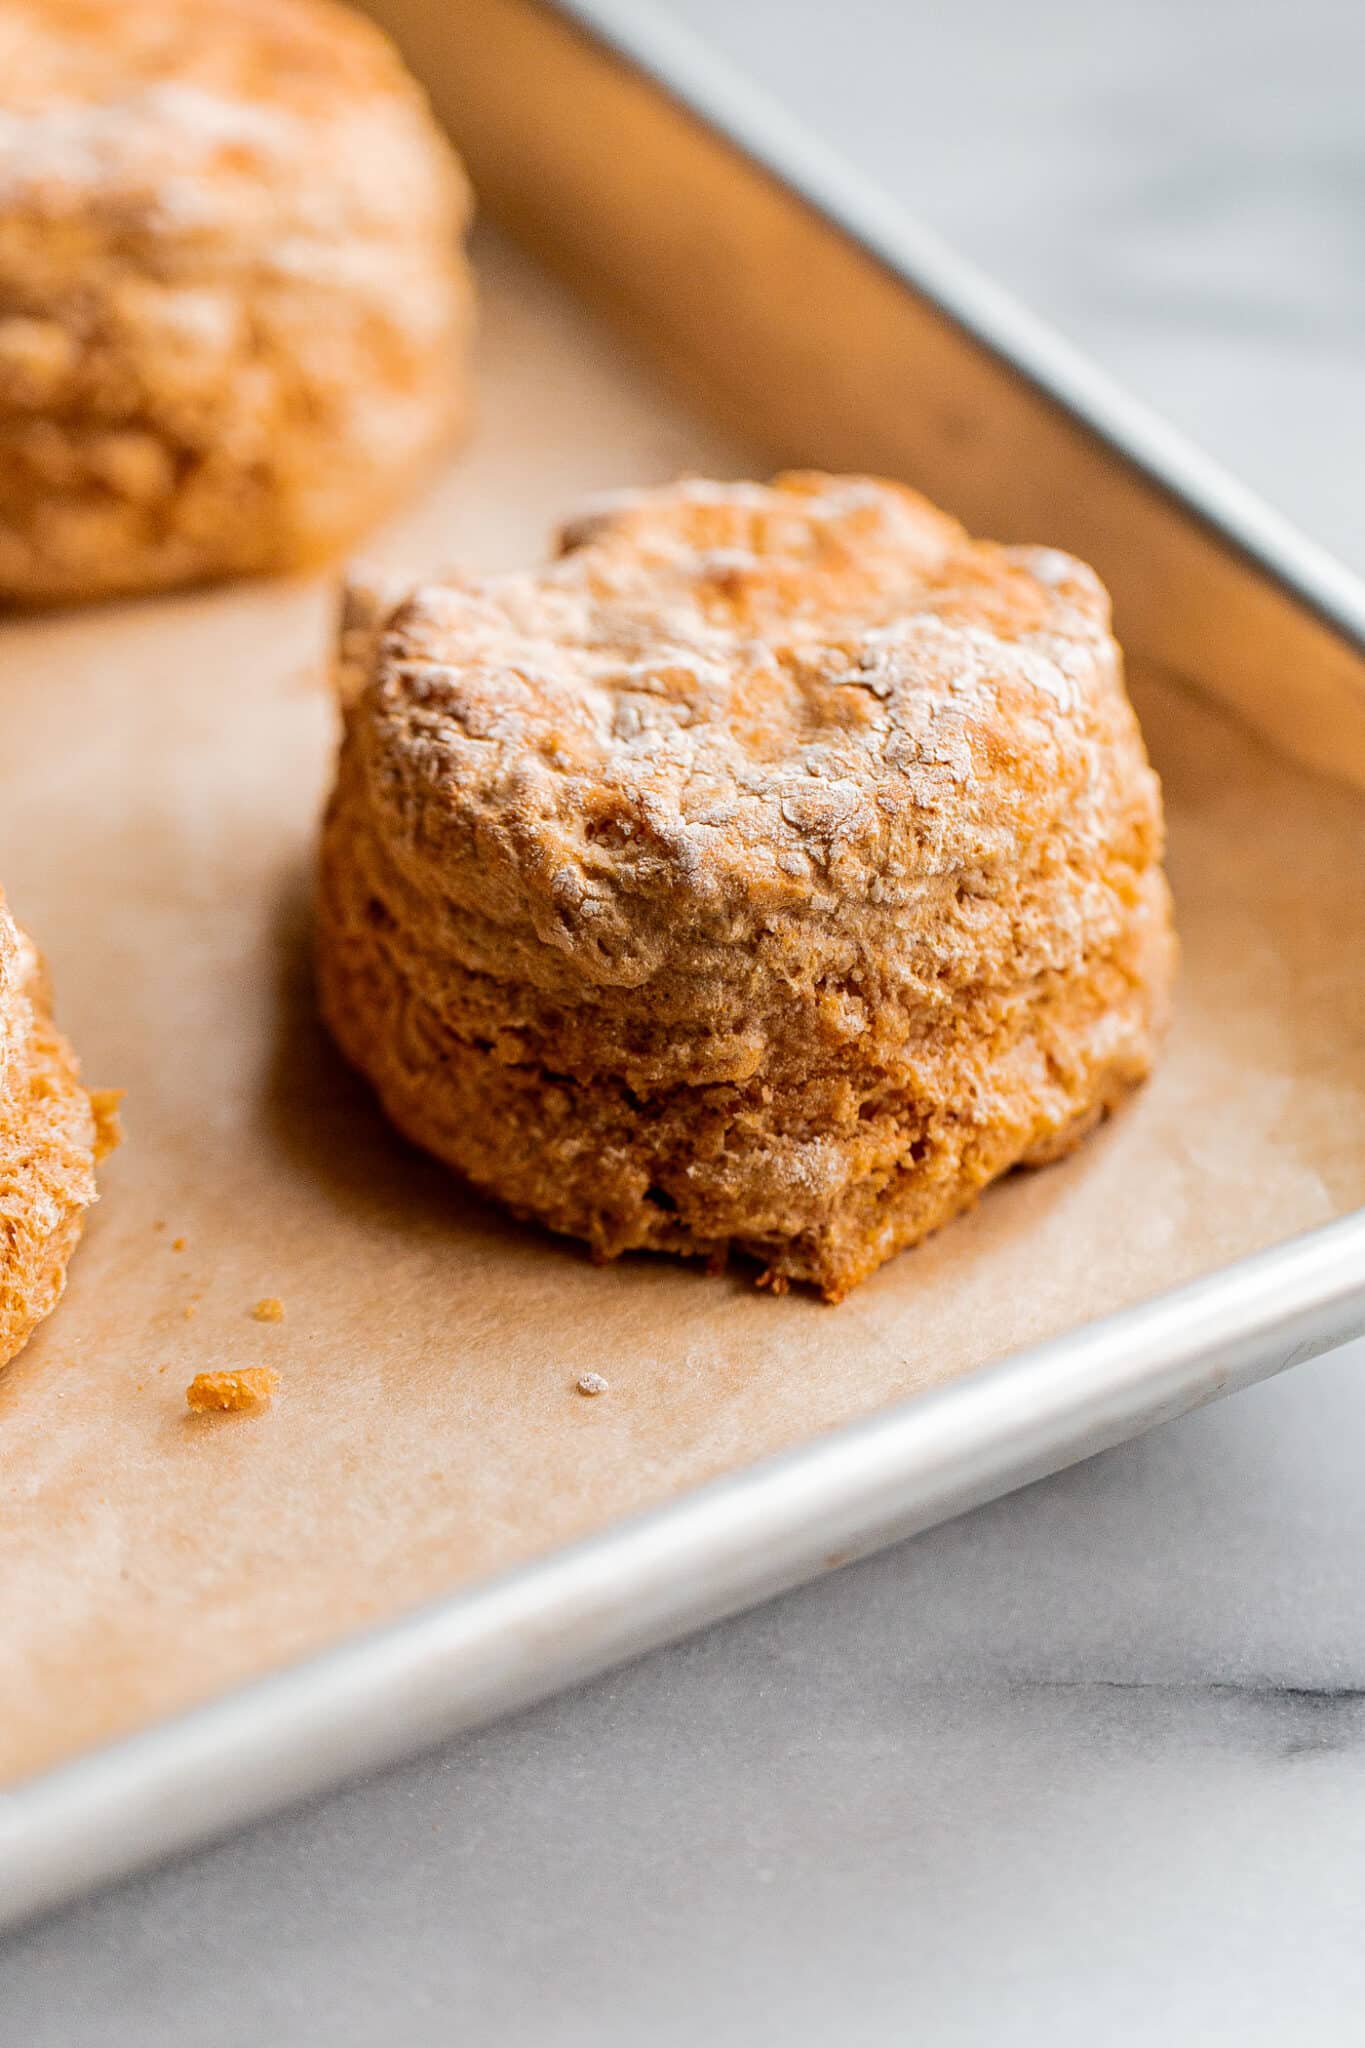 A biscuiterie (and a recipe) you didn't know you needed